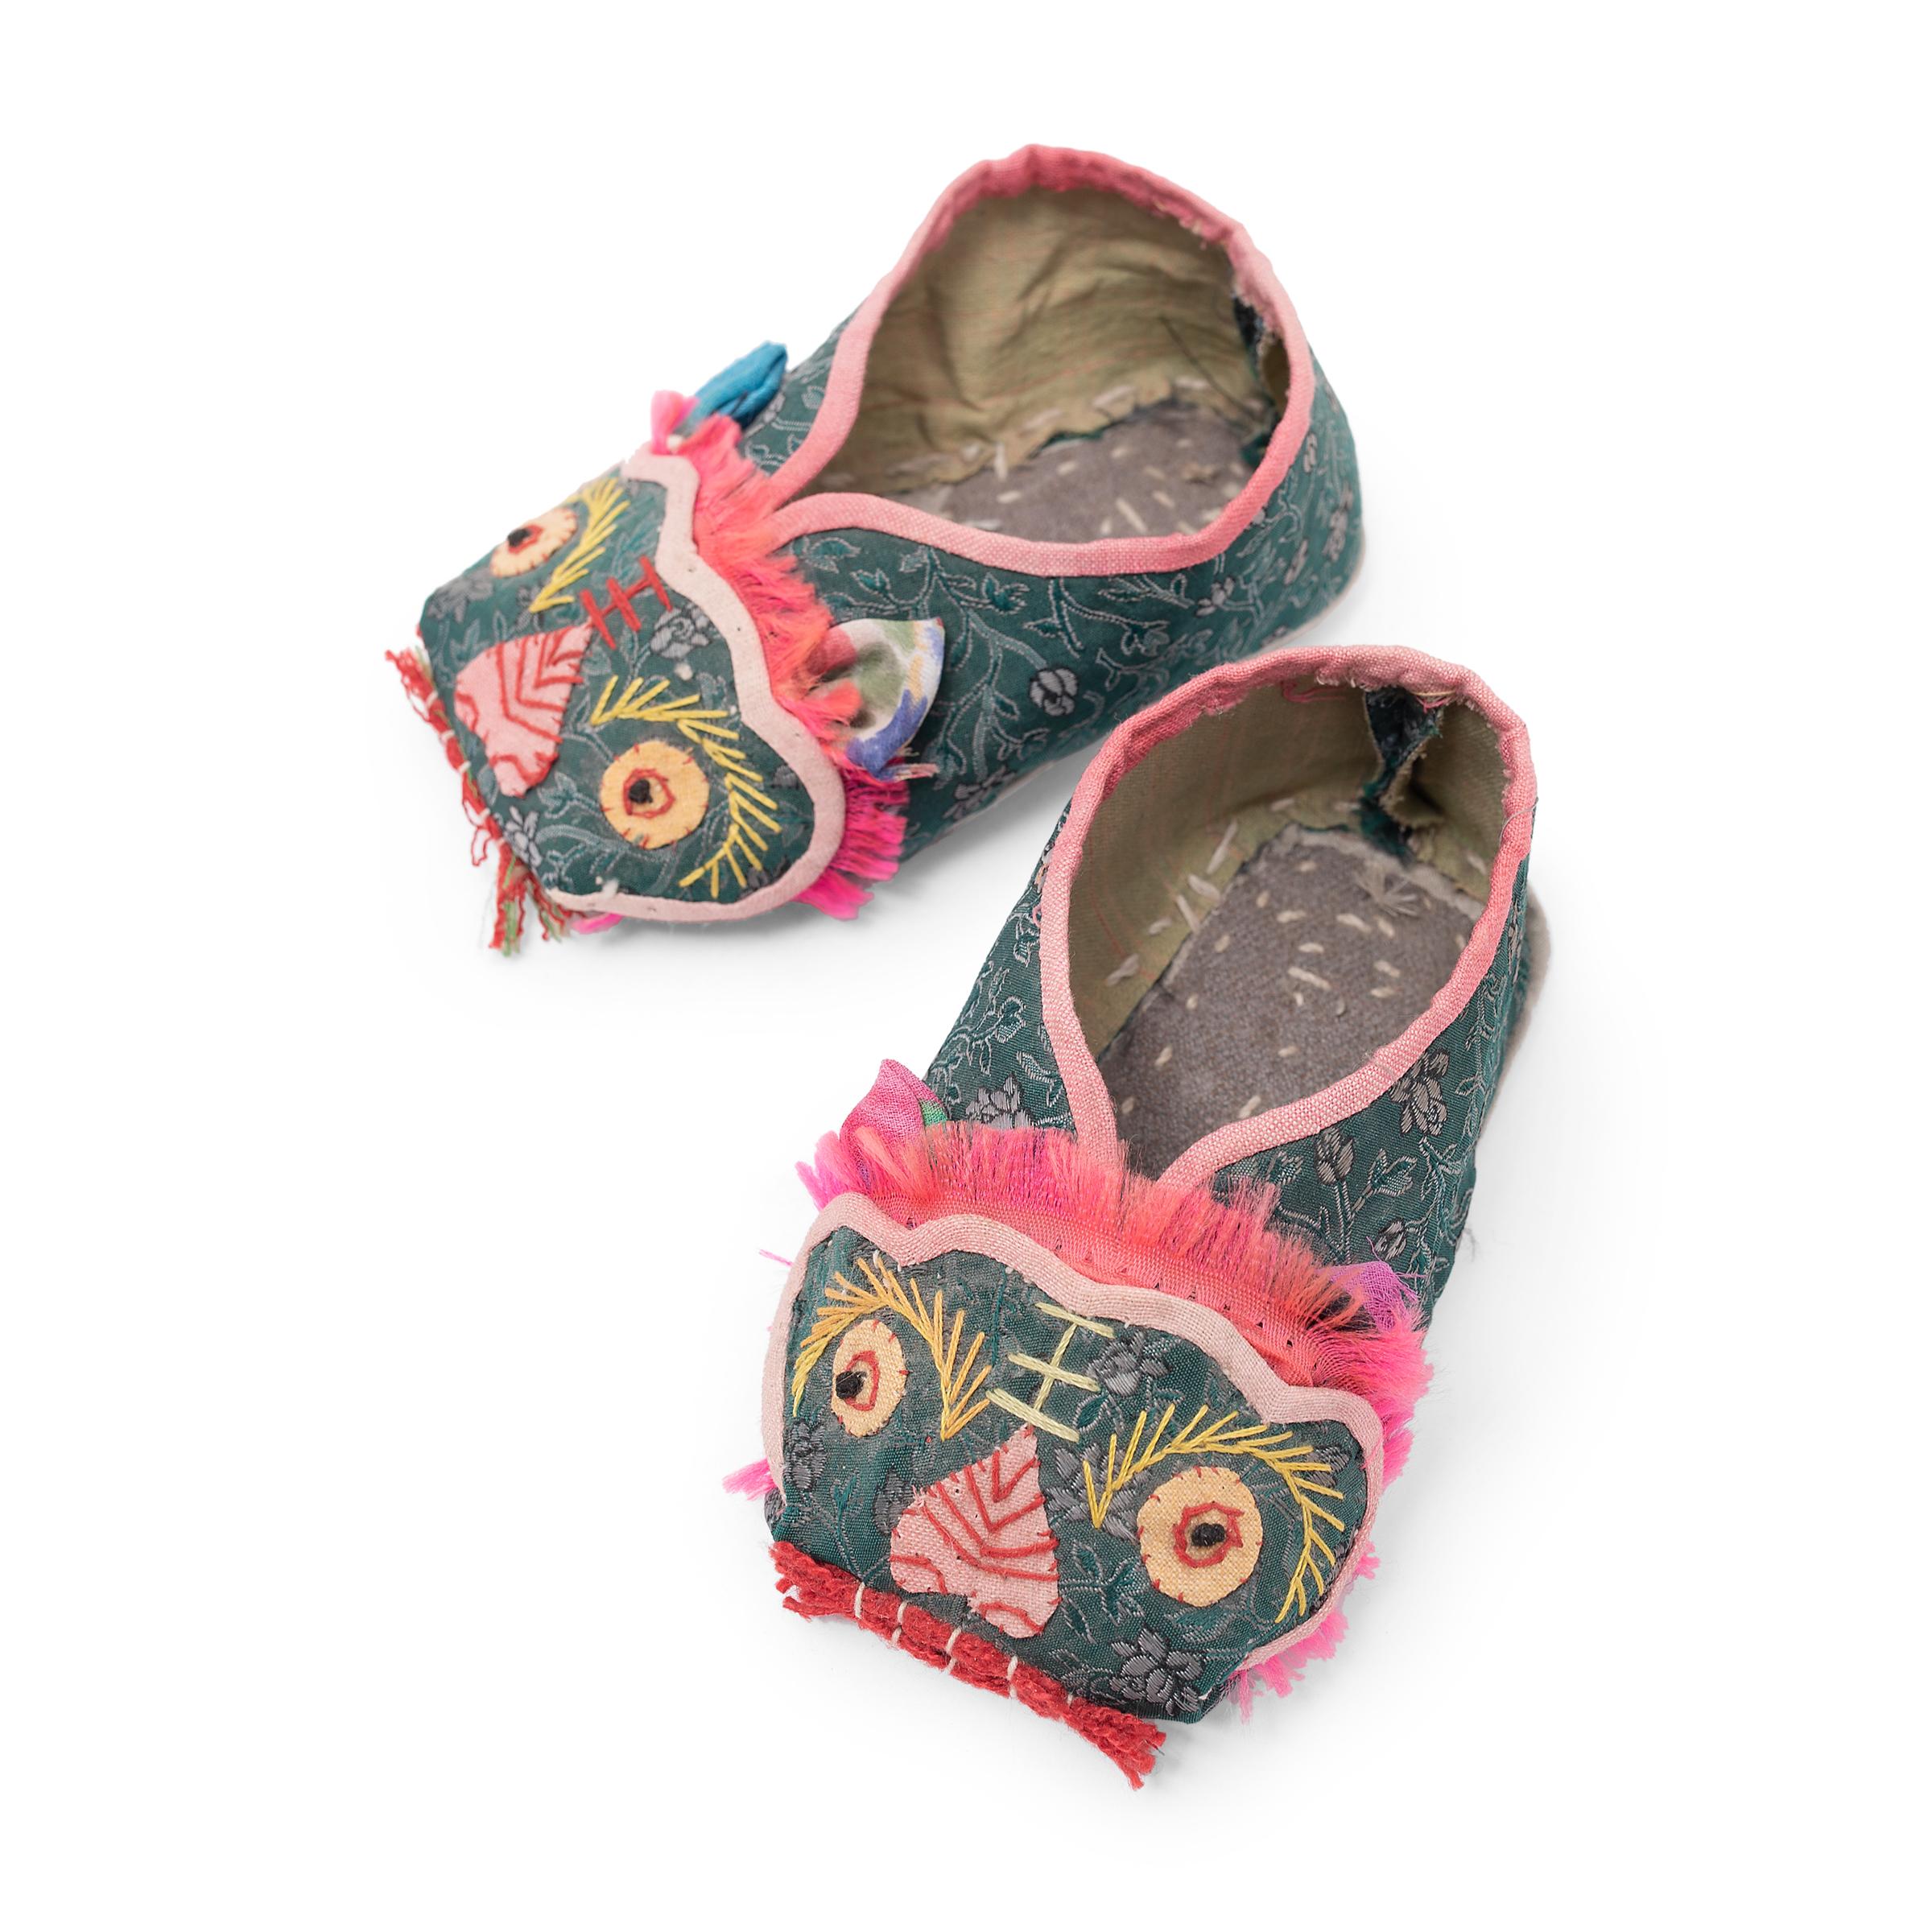 This charming pair of petite children's shoes are lovingly hand-sewn of silk and cotton, embroidered to look like little lions. Powerful yet benevolent, the lion is considered the 